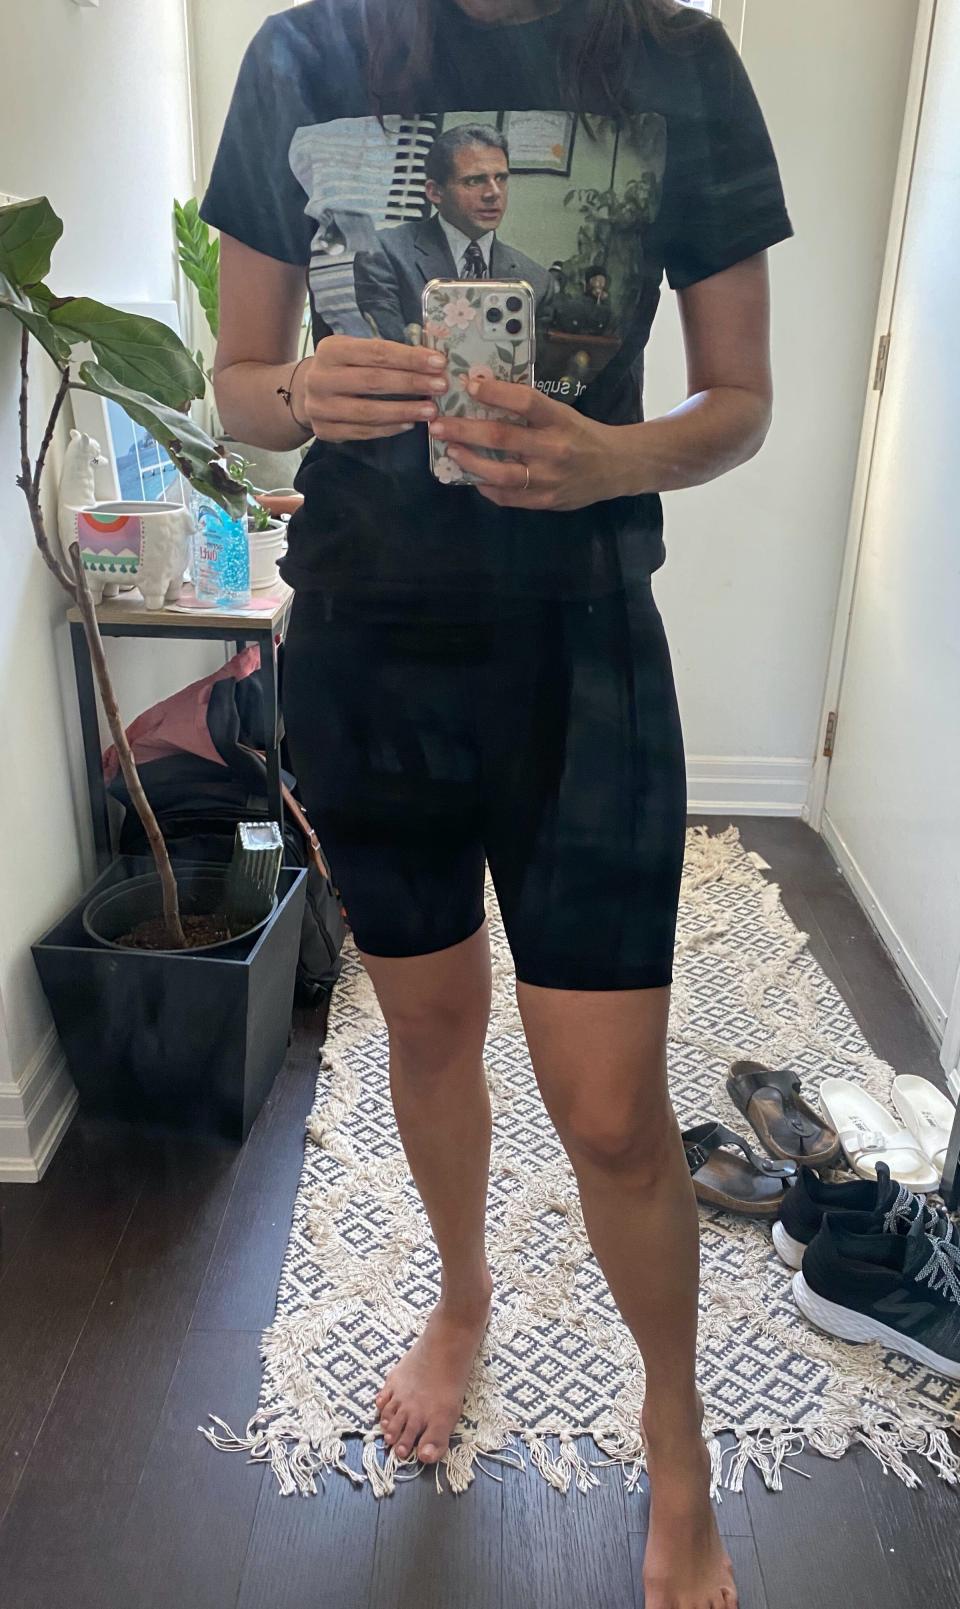 Wearing the Perform Bike Short in Black (and yes that is Michael Scott on my shirt).